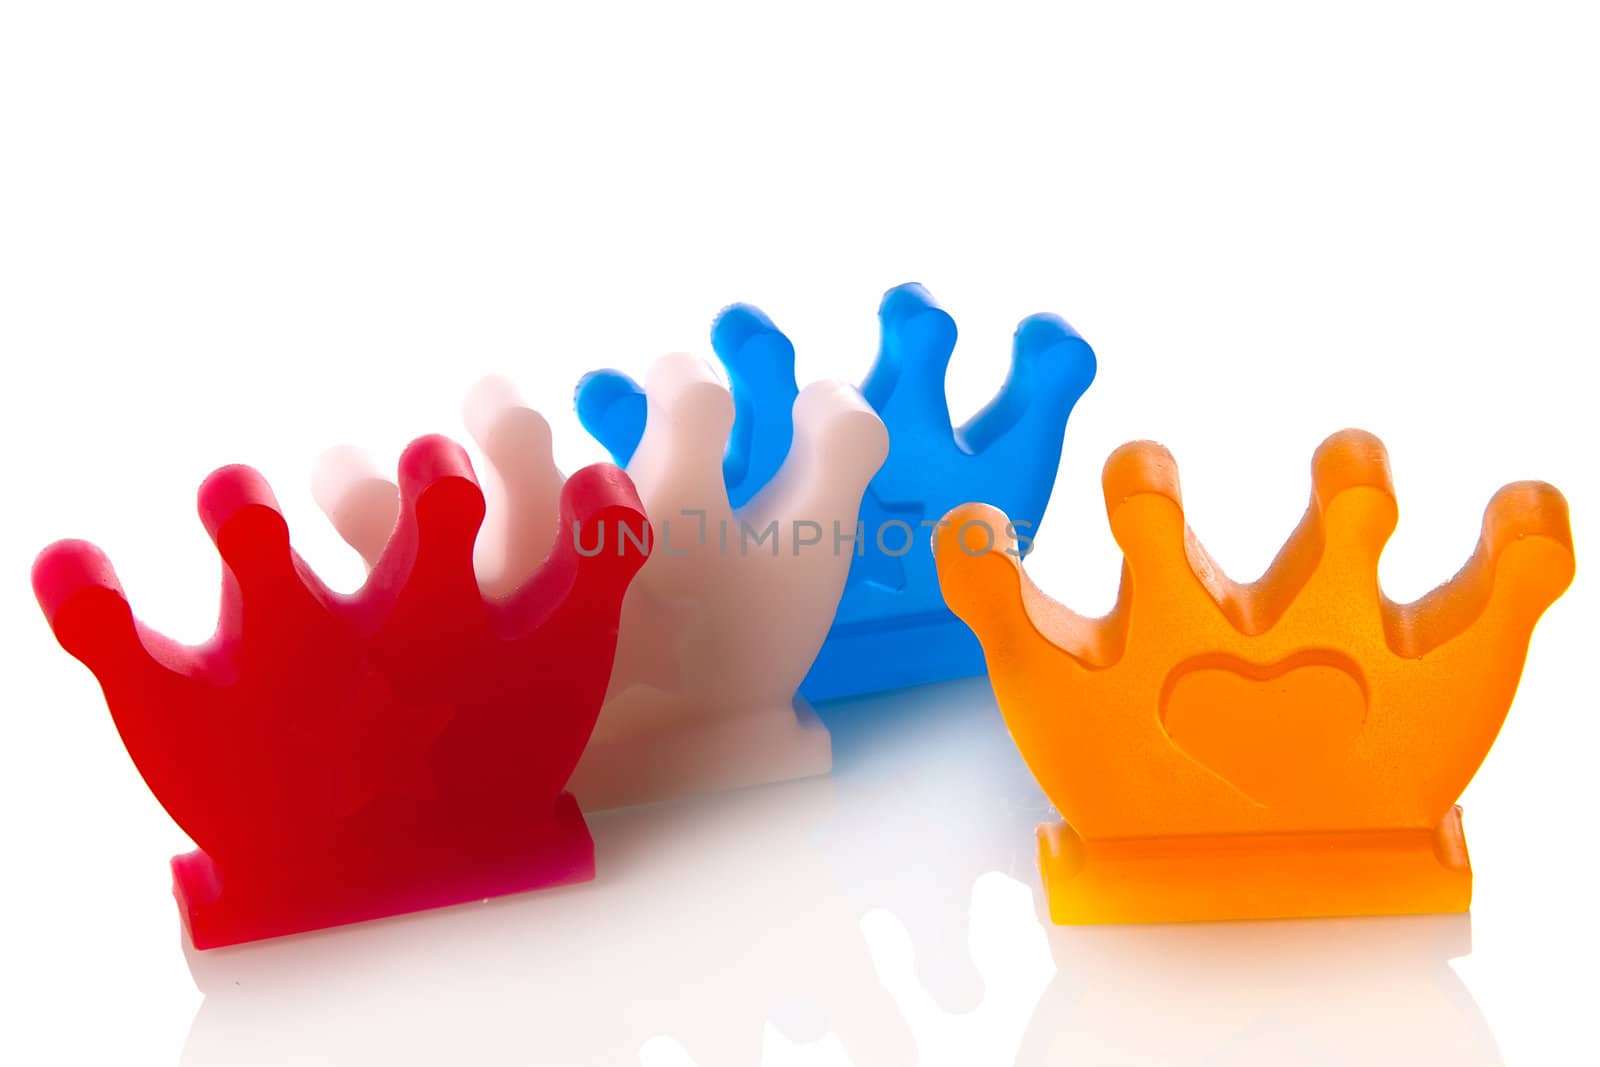 crowns in the color red, white, blue and orange, symbol of the dutch coronation on 30th of april 2013